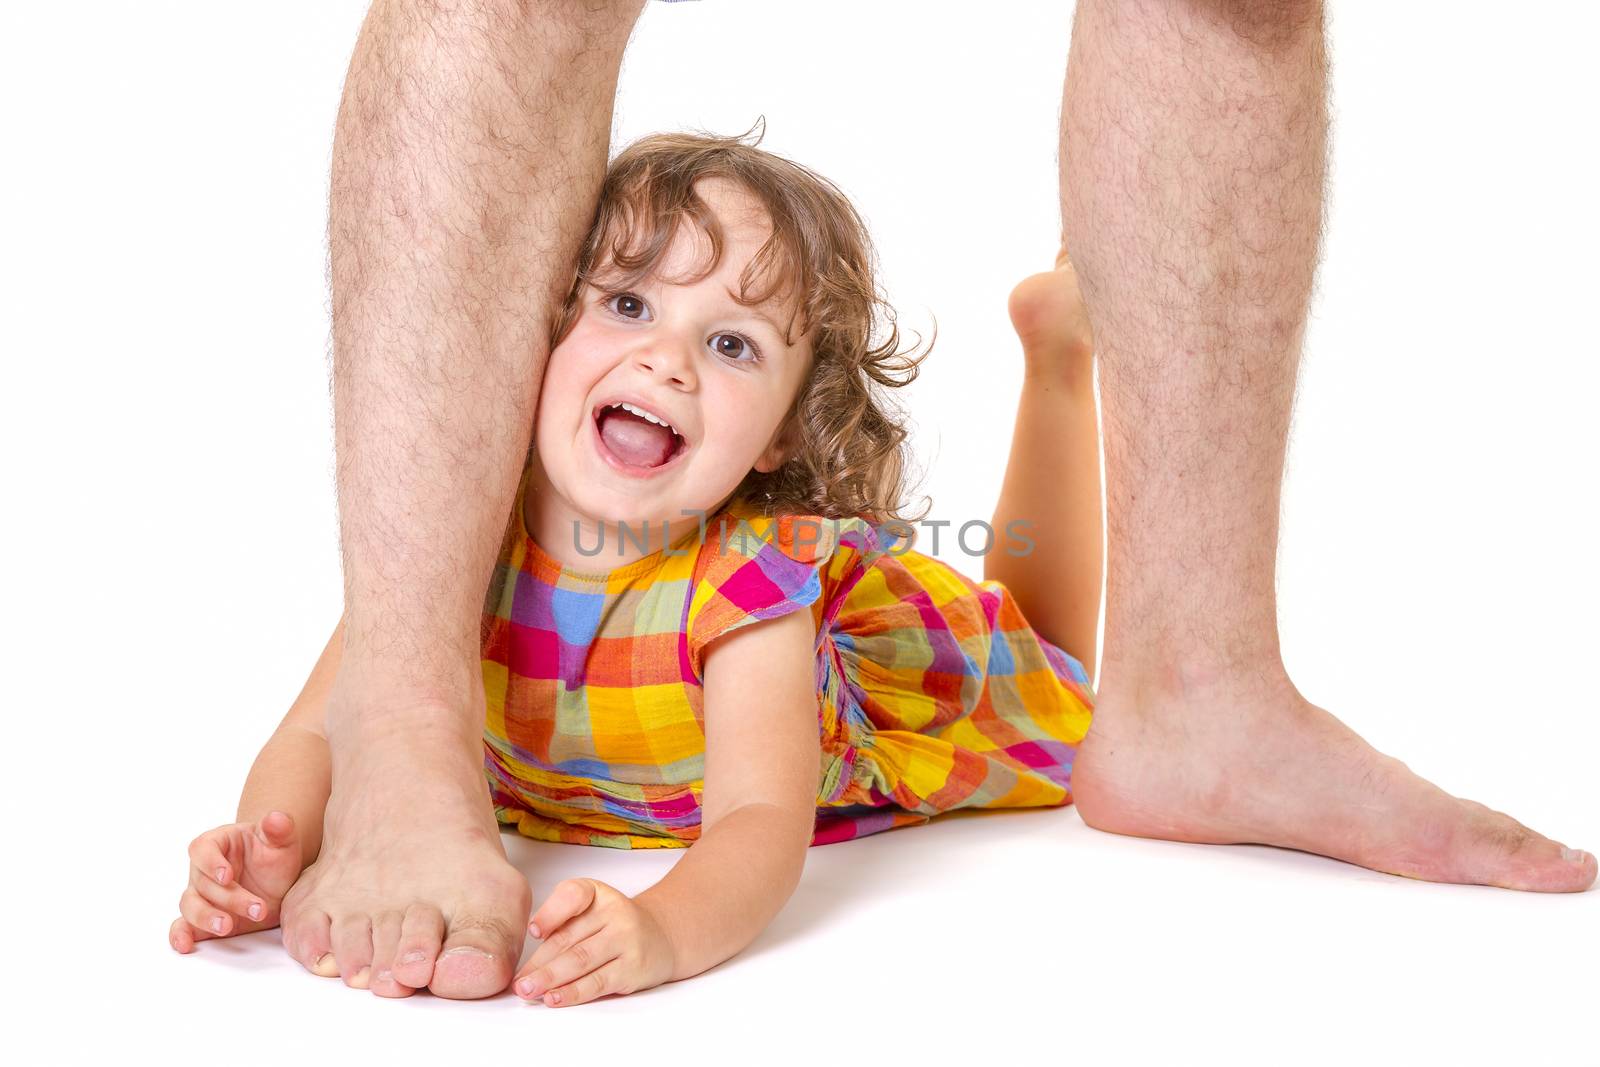 Little daughter at the feet of her father by manaemedia